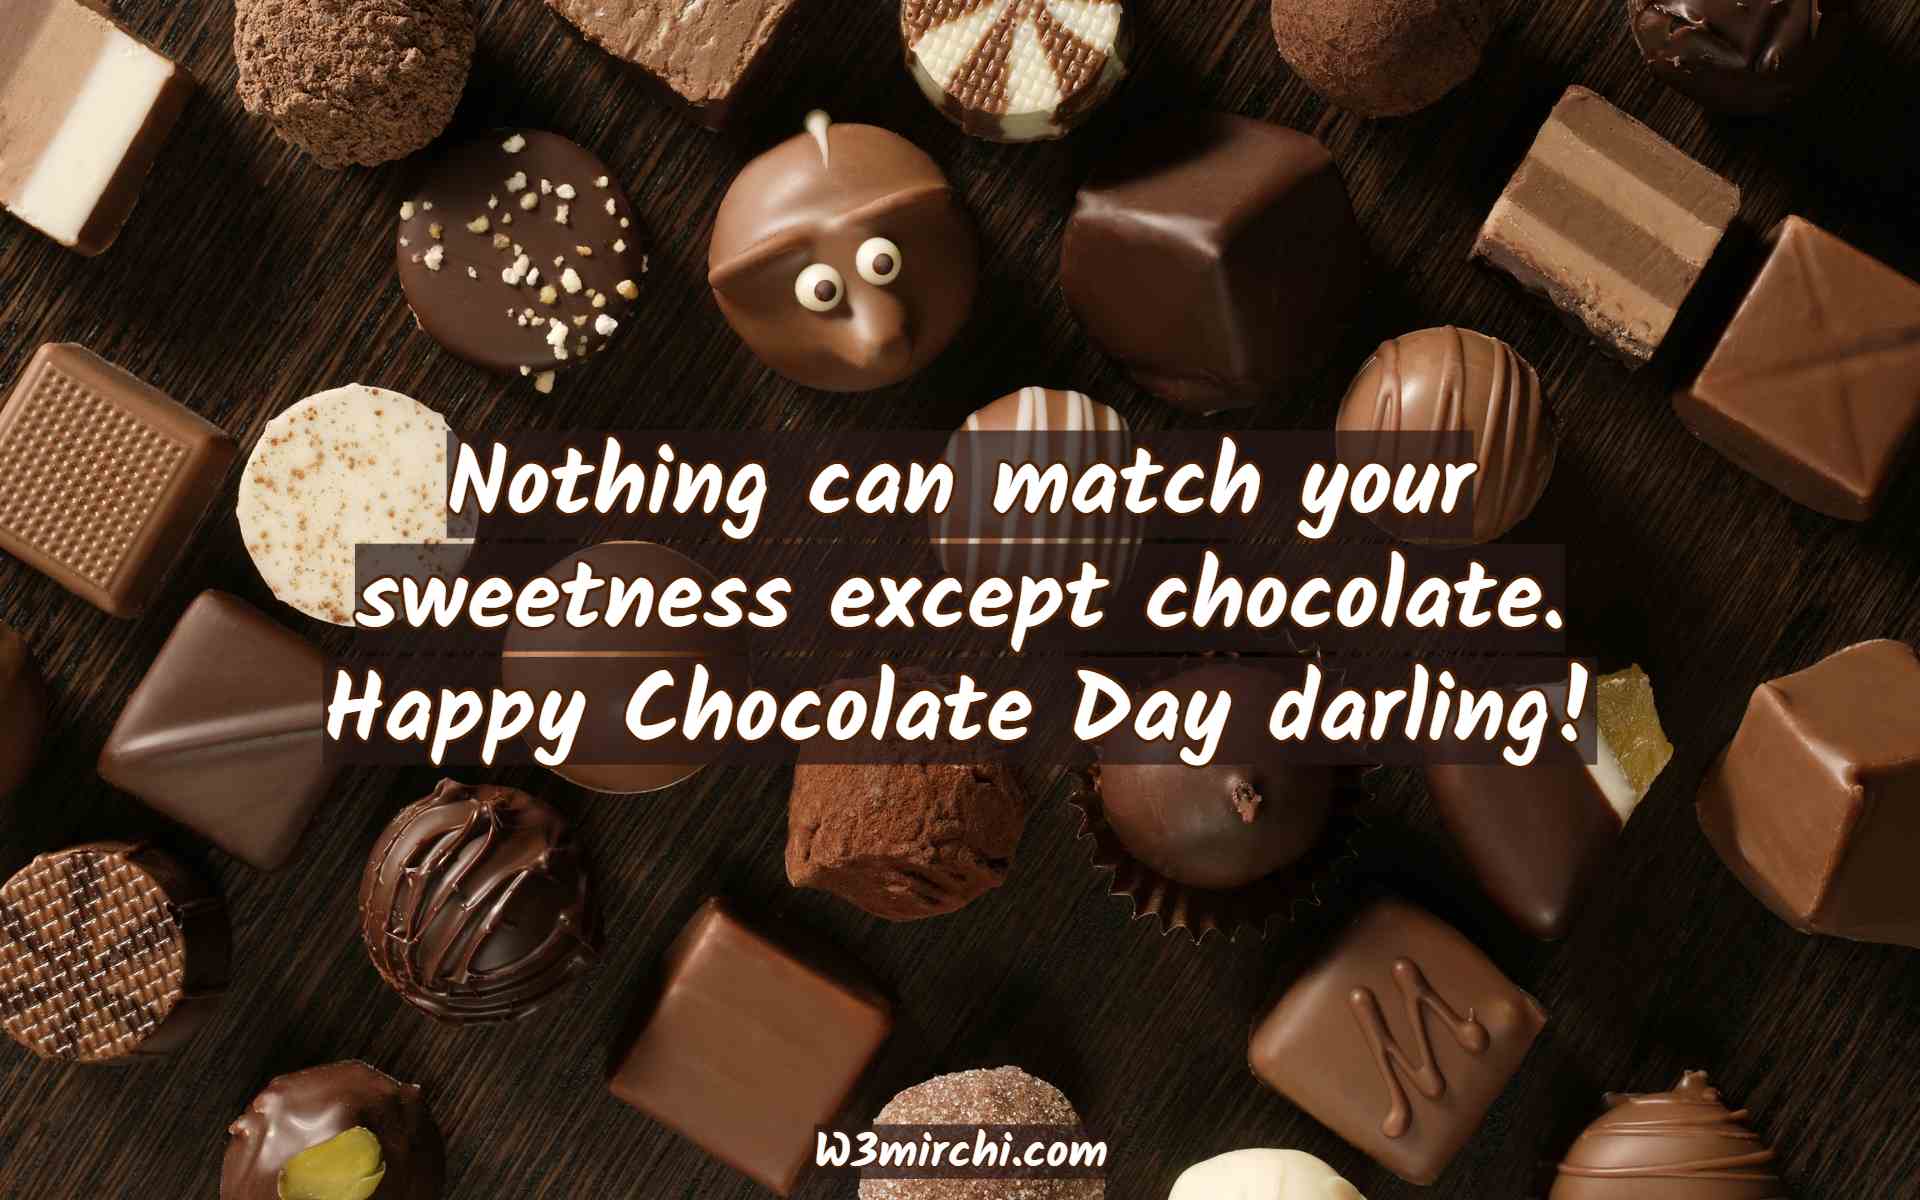 Happy Chocolate Day darling!